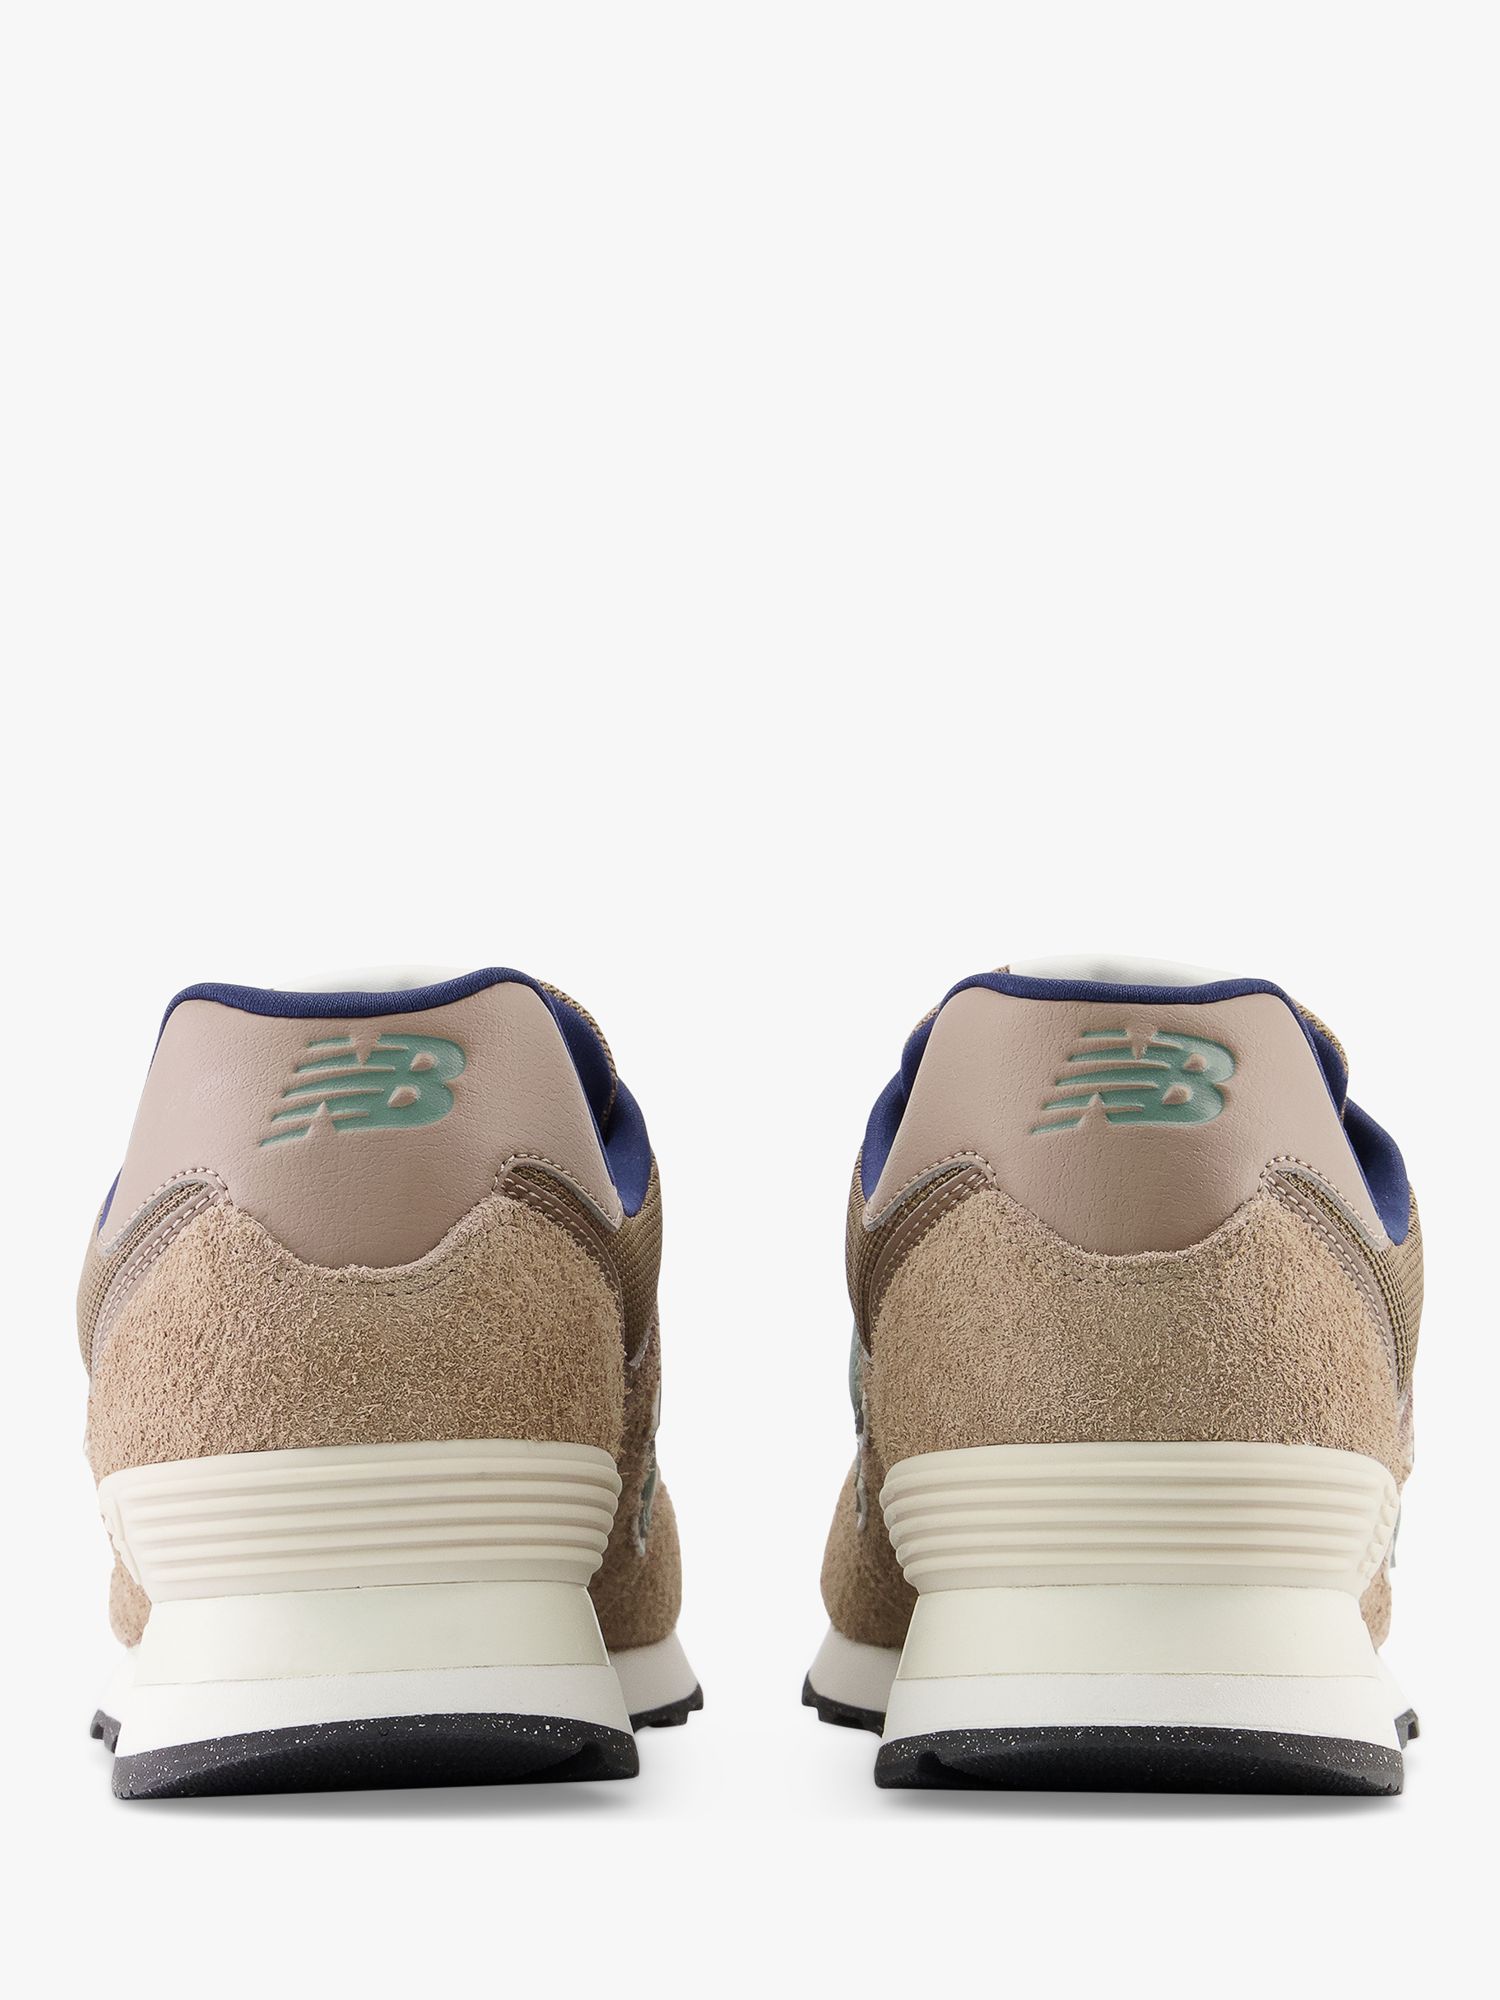 New Balance 574 Suede Trainers, Brown, 7